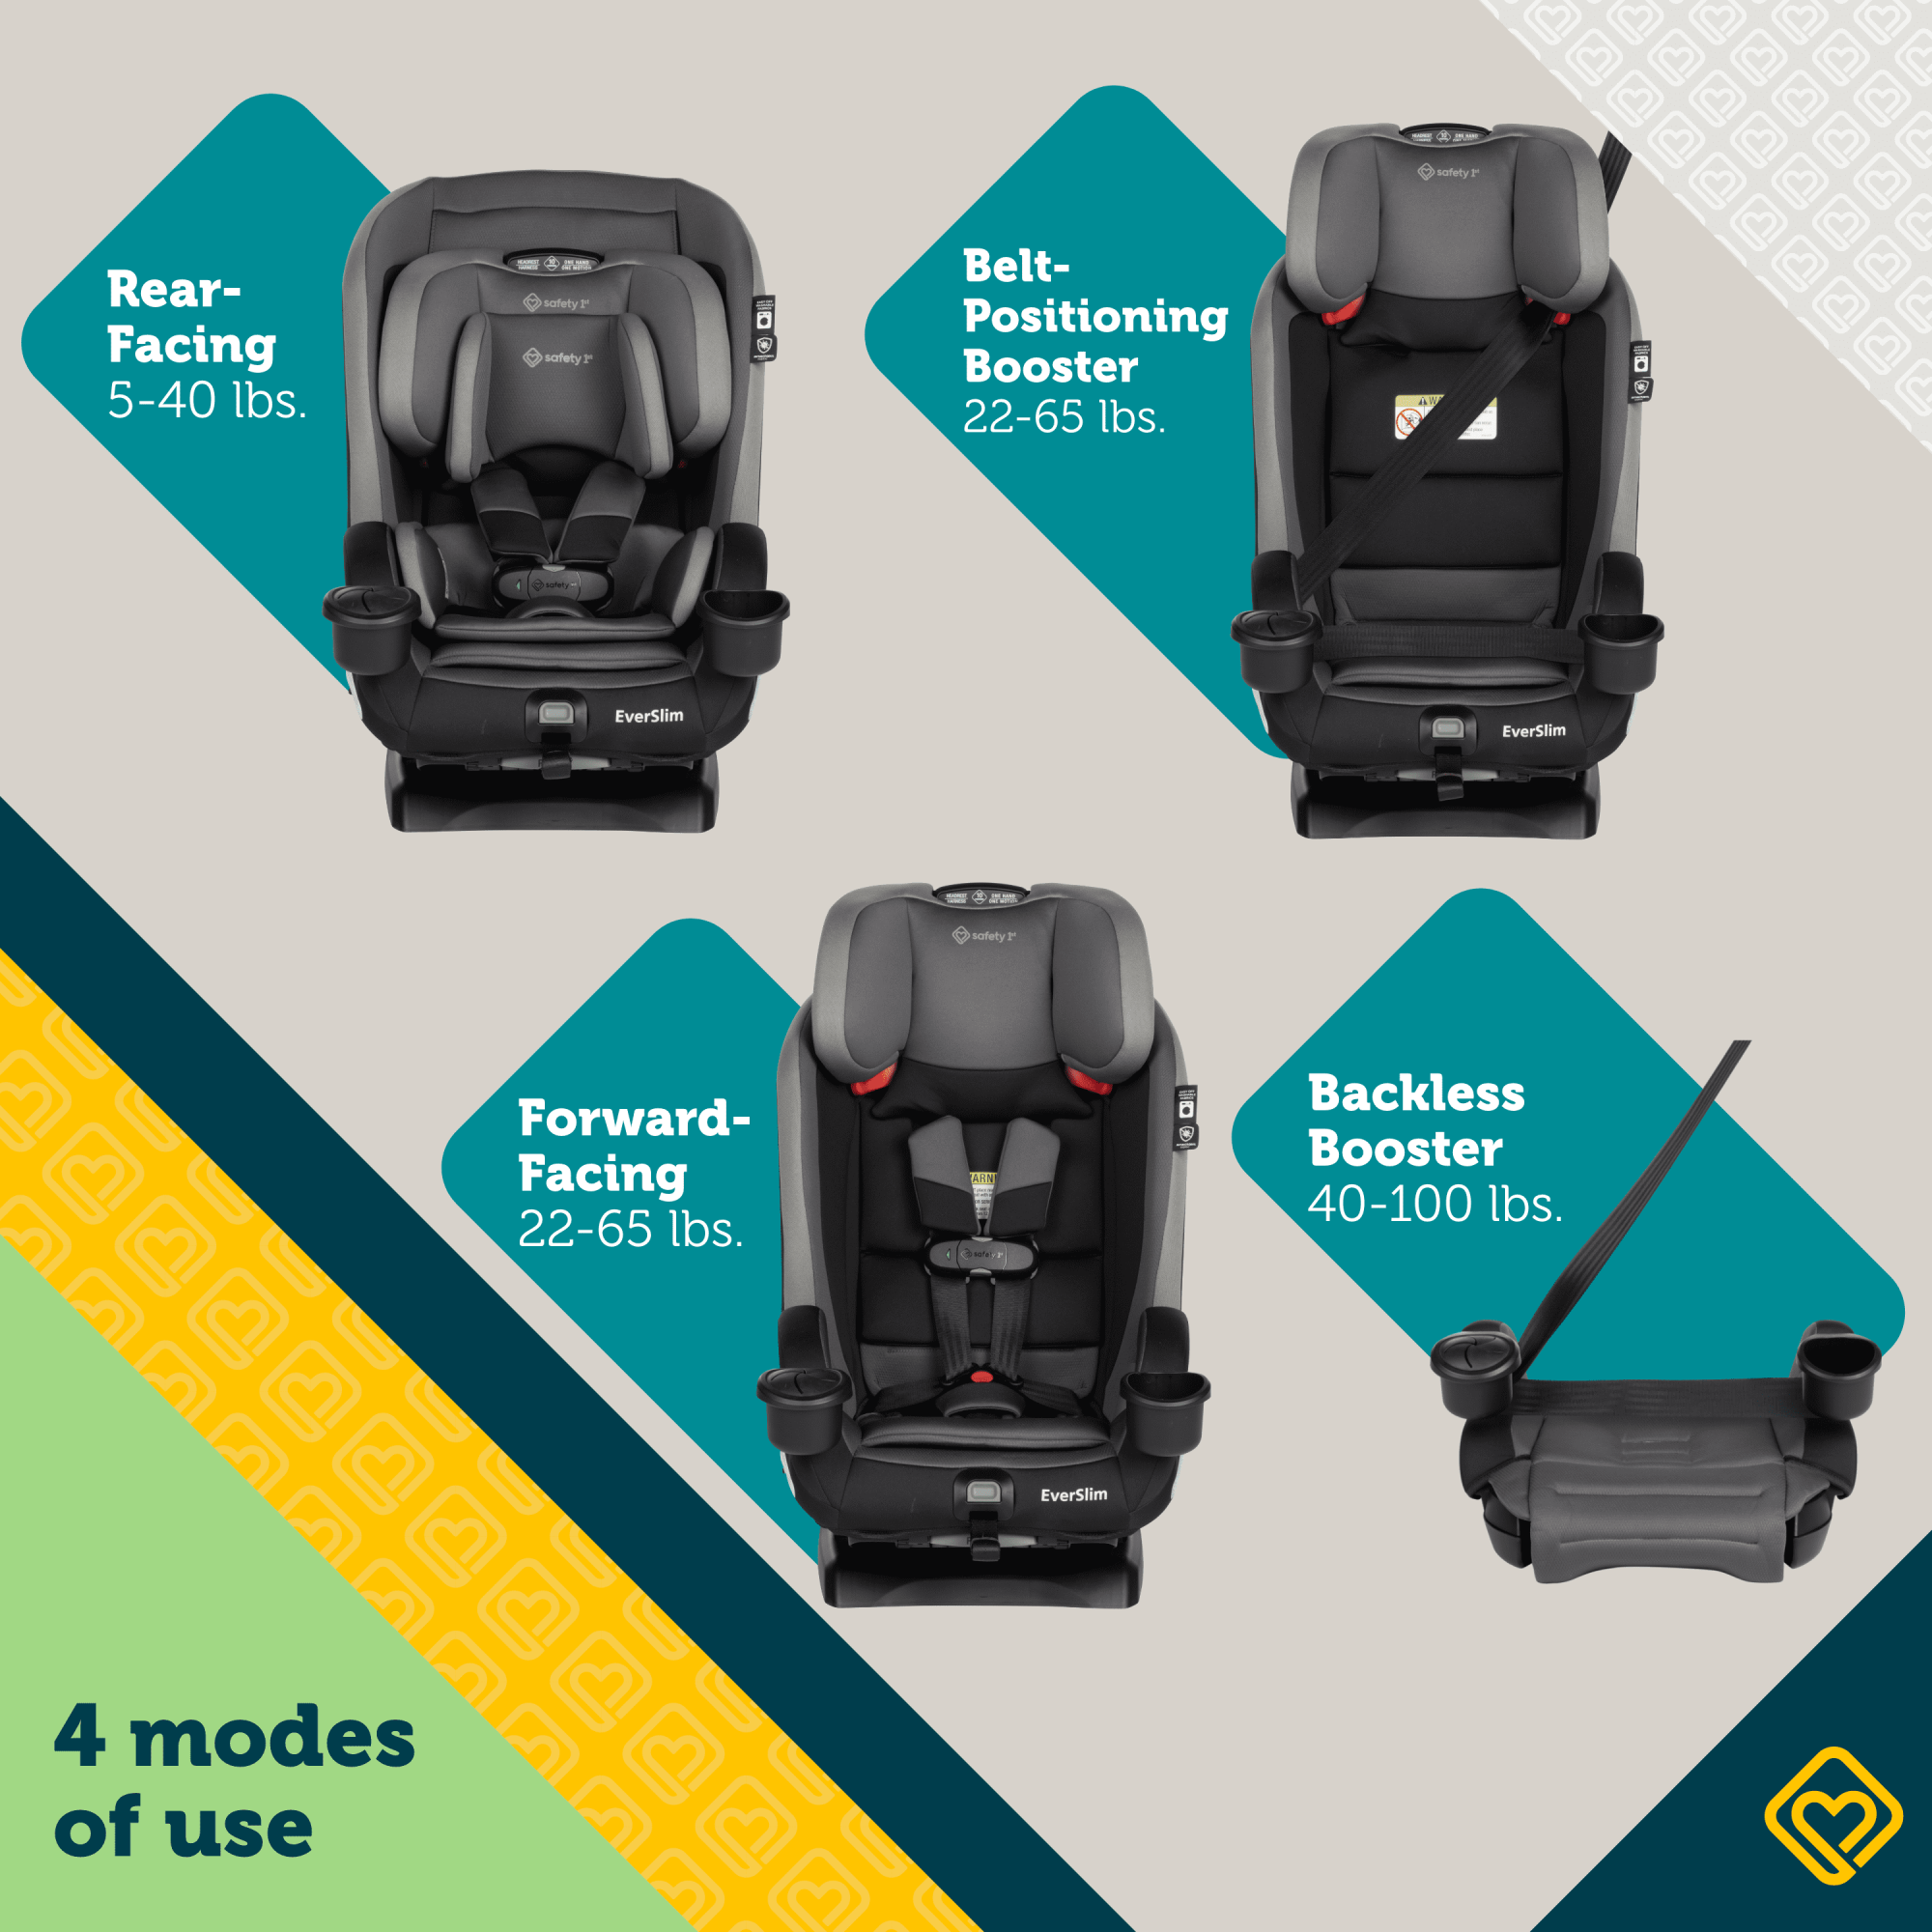 EverSlim 4-Mode All-in-One Convertible Car Seat - 4 modes of use: rear-facing 5-40 lbs., belt-positioning booster 22-65 lbs., forward-facing 22-65 lbs., backless booster 40-100 lbs.